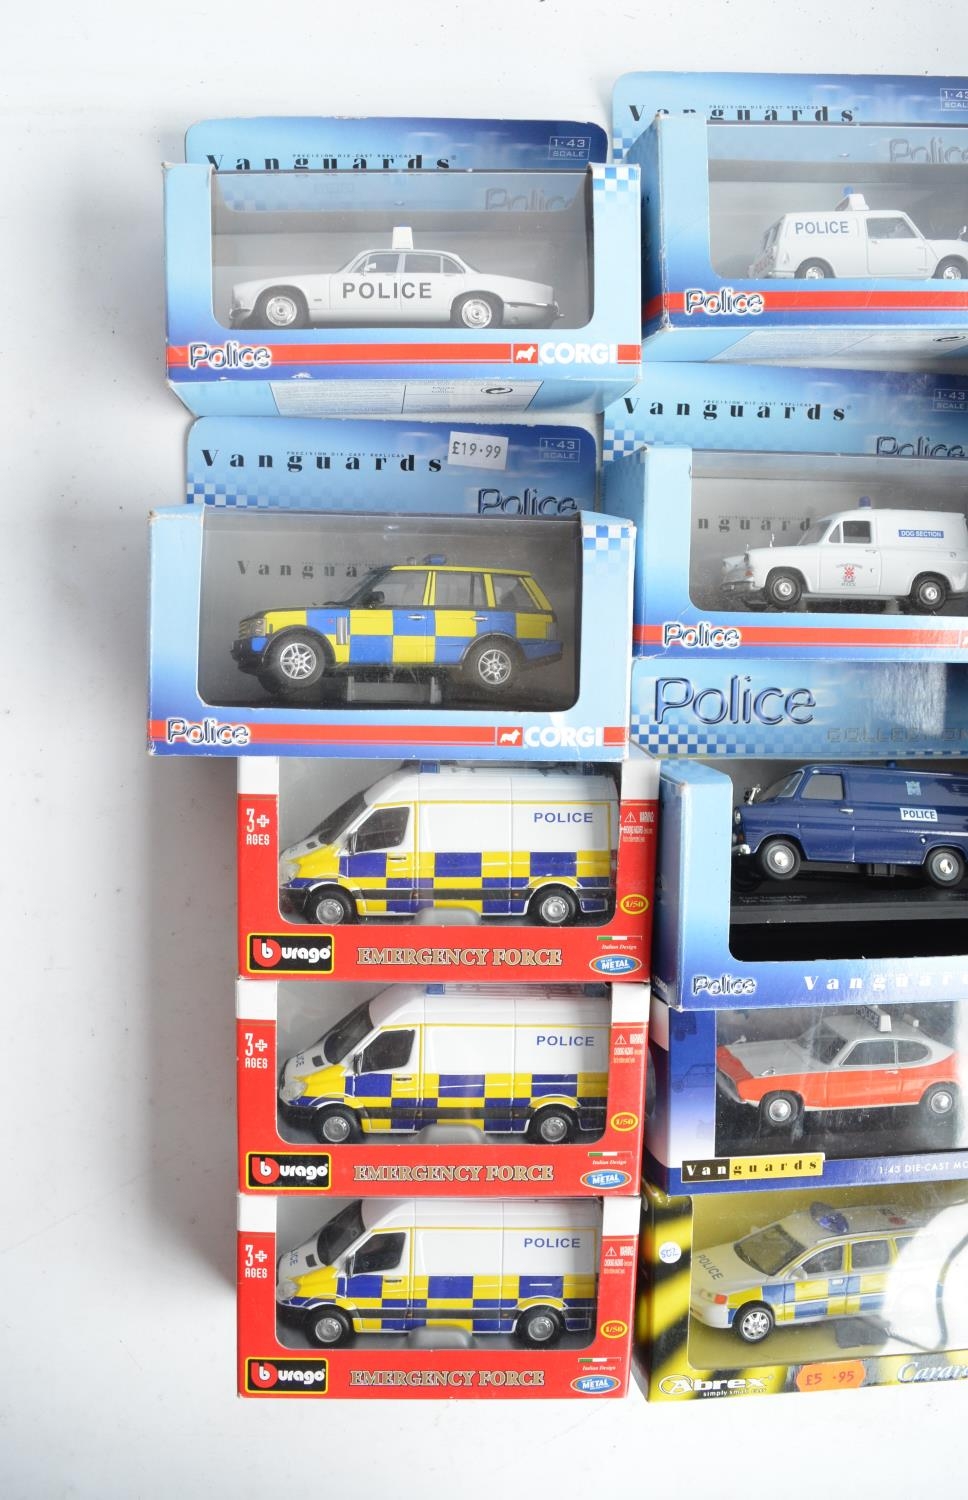 Collection of diecast model Police cars and vehicles from Corgi, Corgi Vanguards, Atlas Editions, - Image 4 of 8